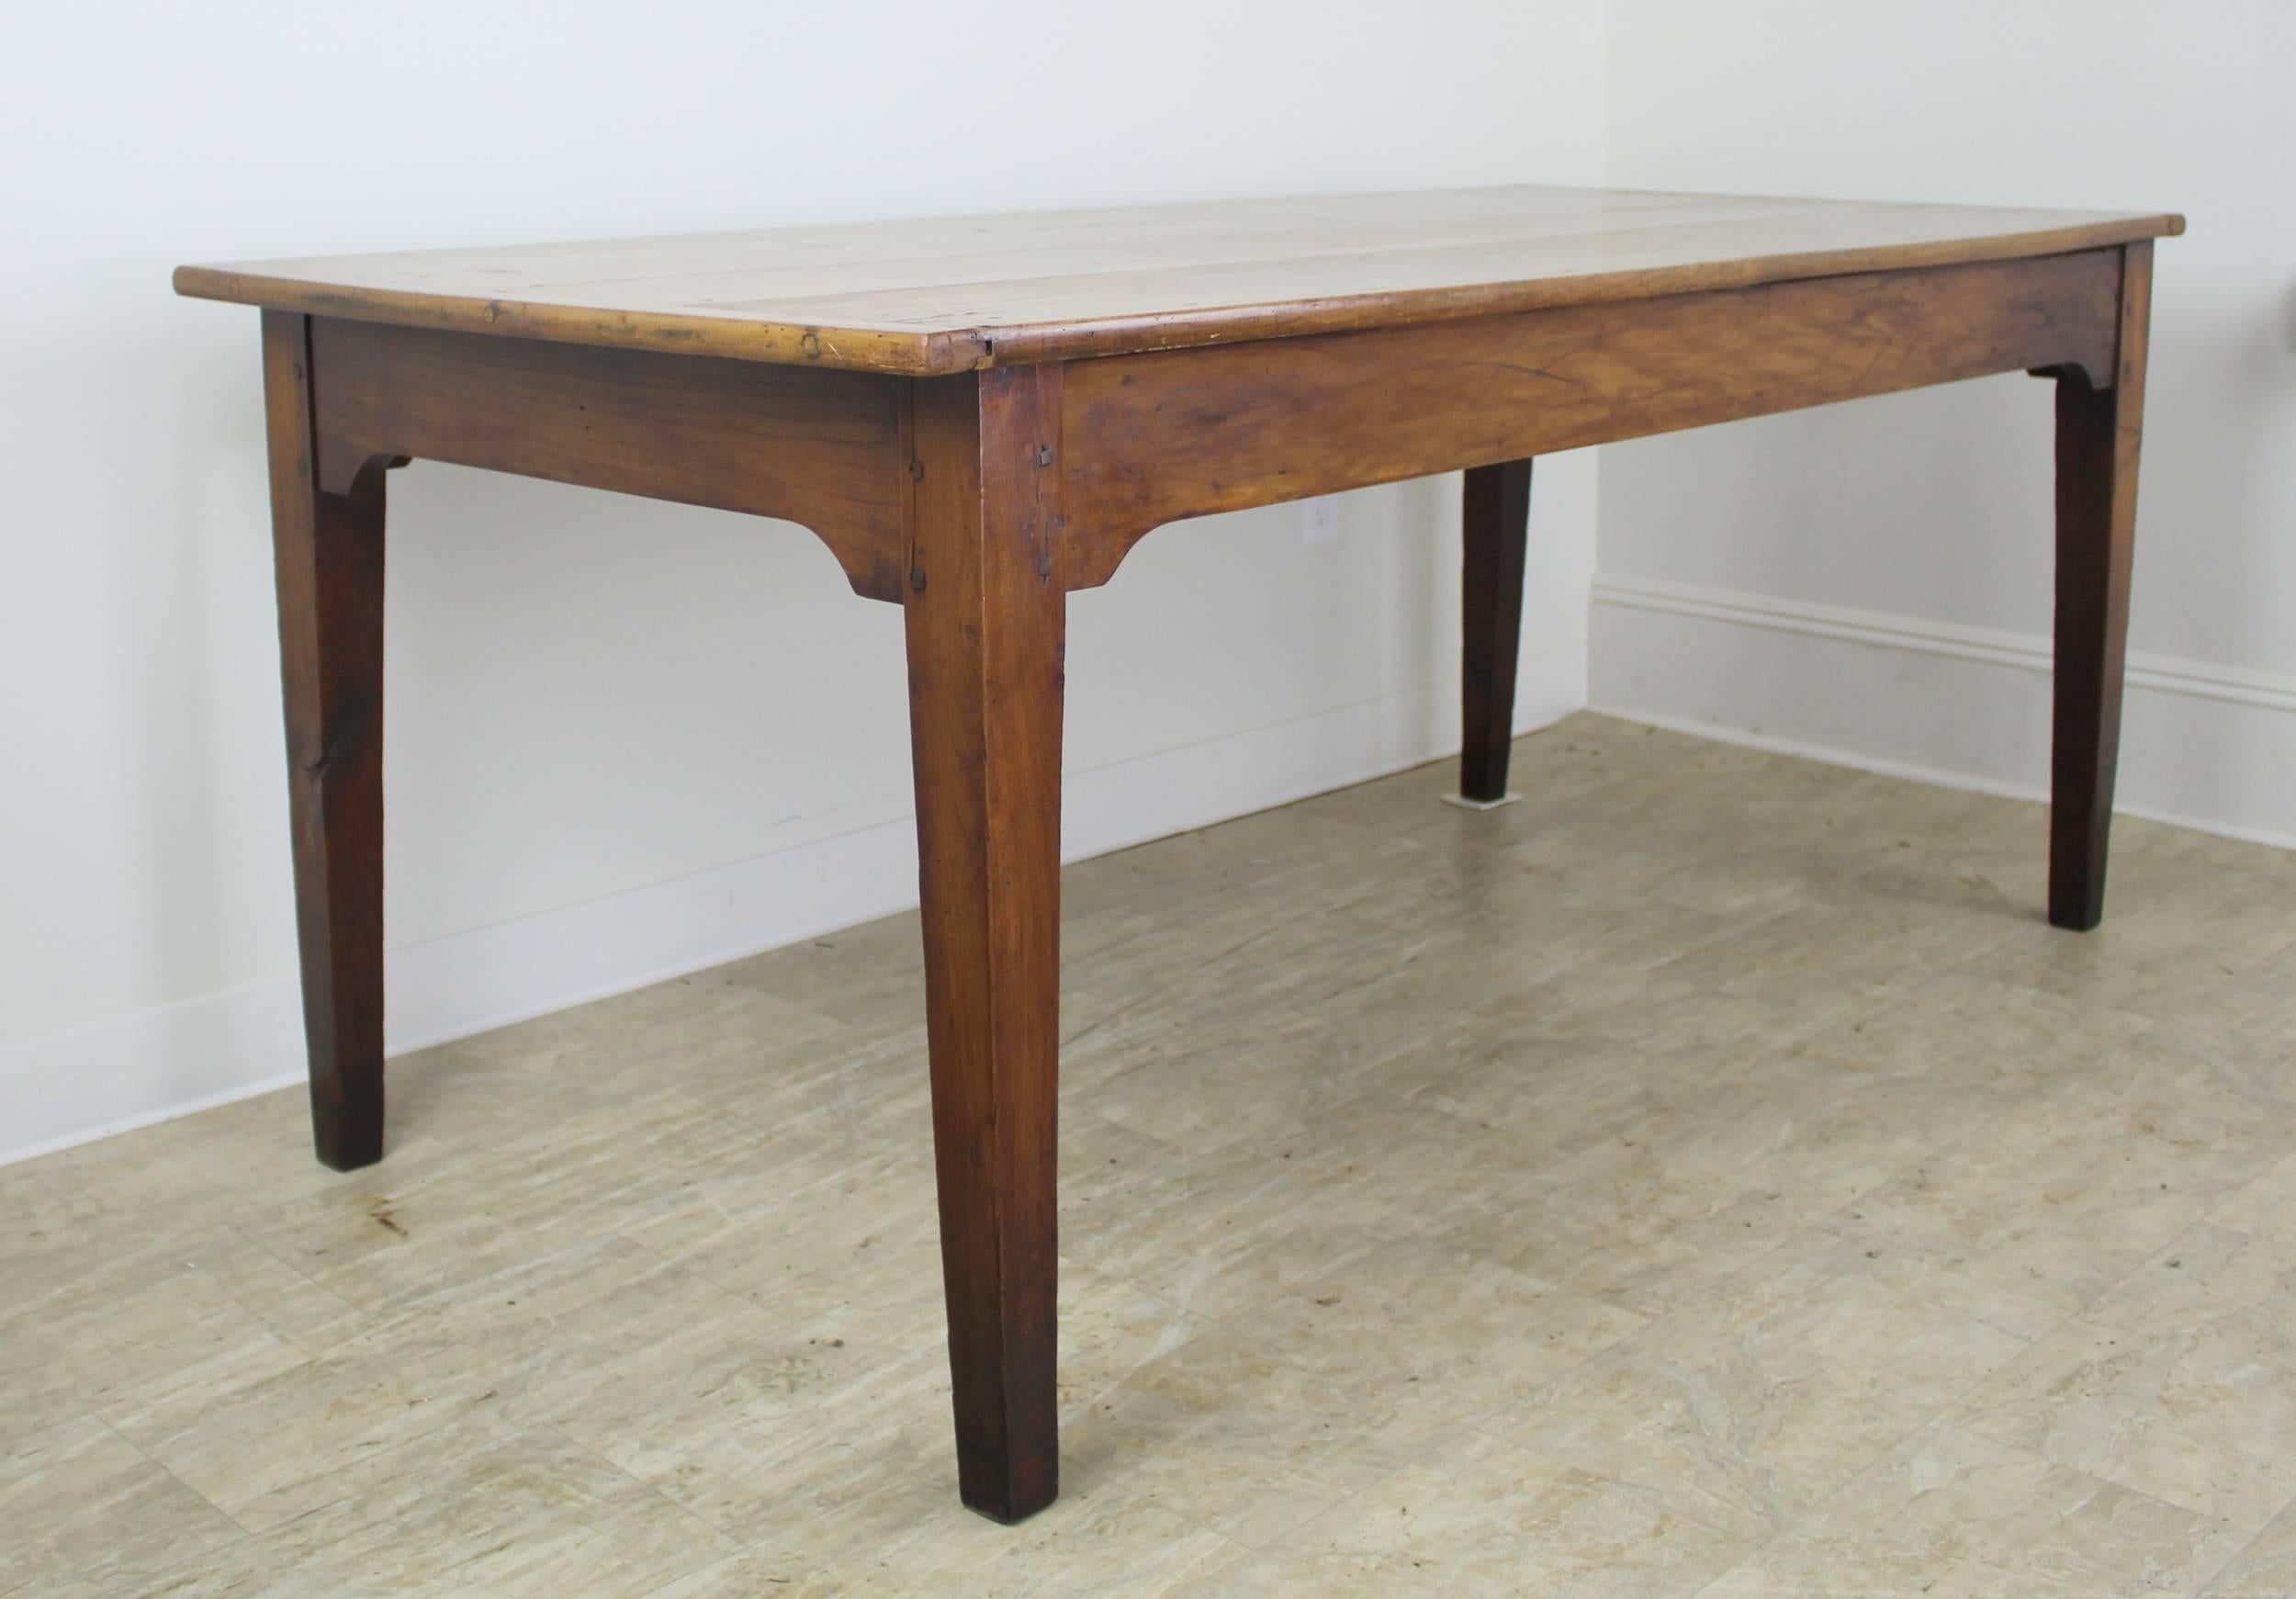 A generously deep farm table with small breadboard ends in pale cherry, polished to a glow. Lovely patina. With 63.5 inches between the legs on the long side, this table can accommodate eight diners. Traditional tapered legs and shaped apron